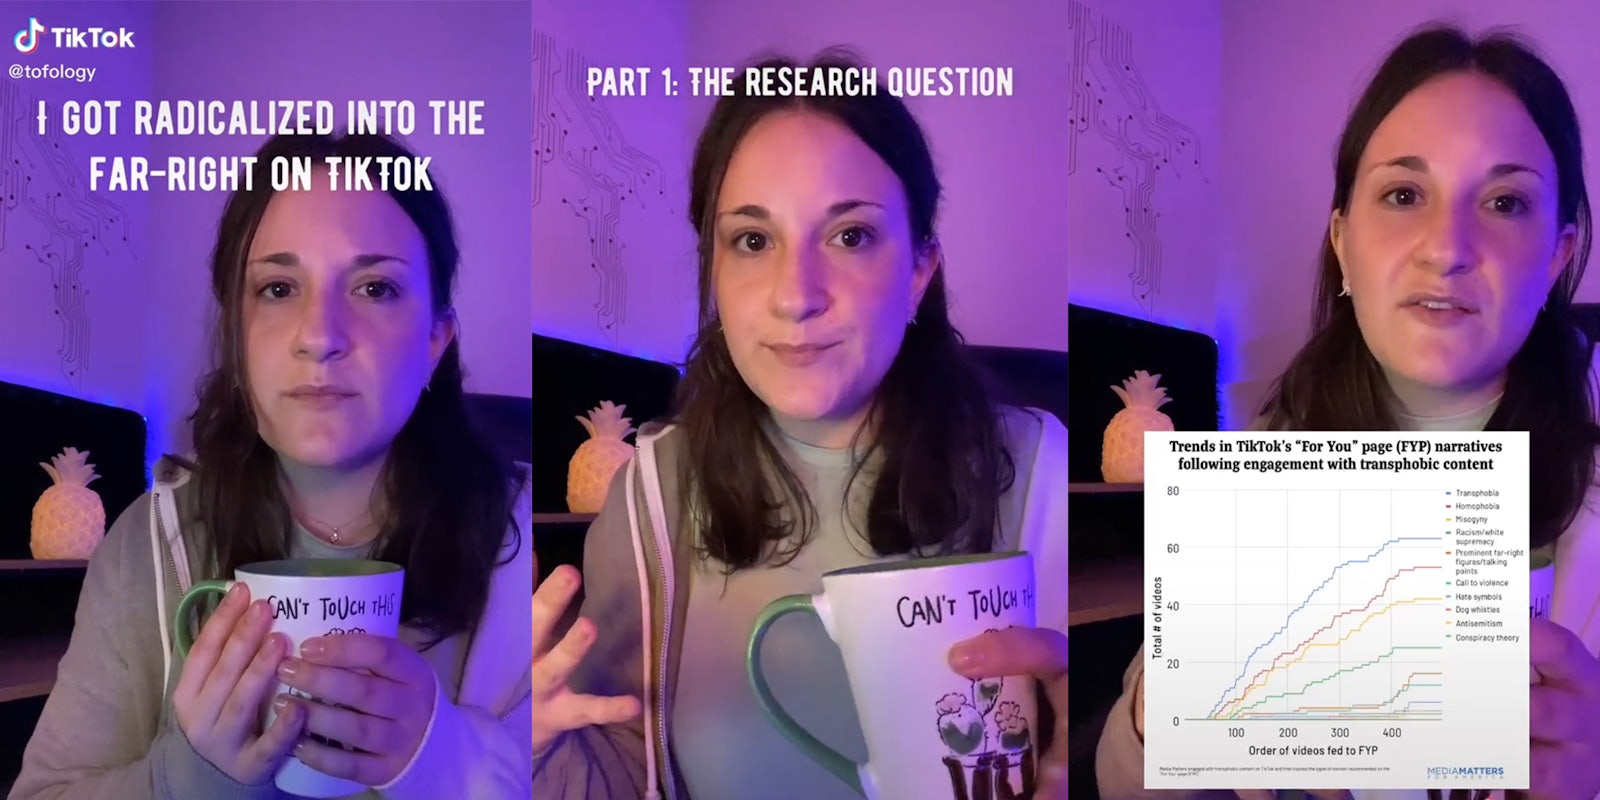 Young woman holding coffee mug with captions 'I got radicalized into the far-right on TikTok' (l) 'Part 1: The Research Question' (c) graph of Trends in TikTok's 'For You' page narratives following engagement with transphobic content